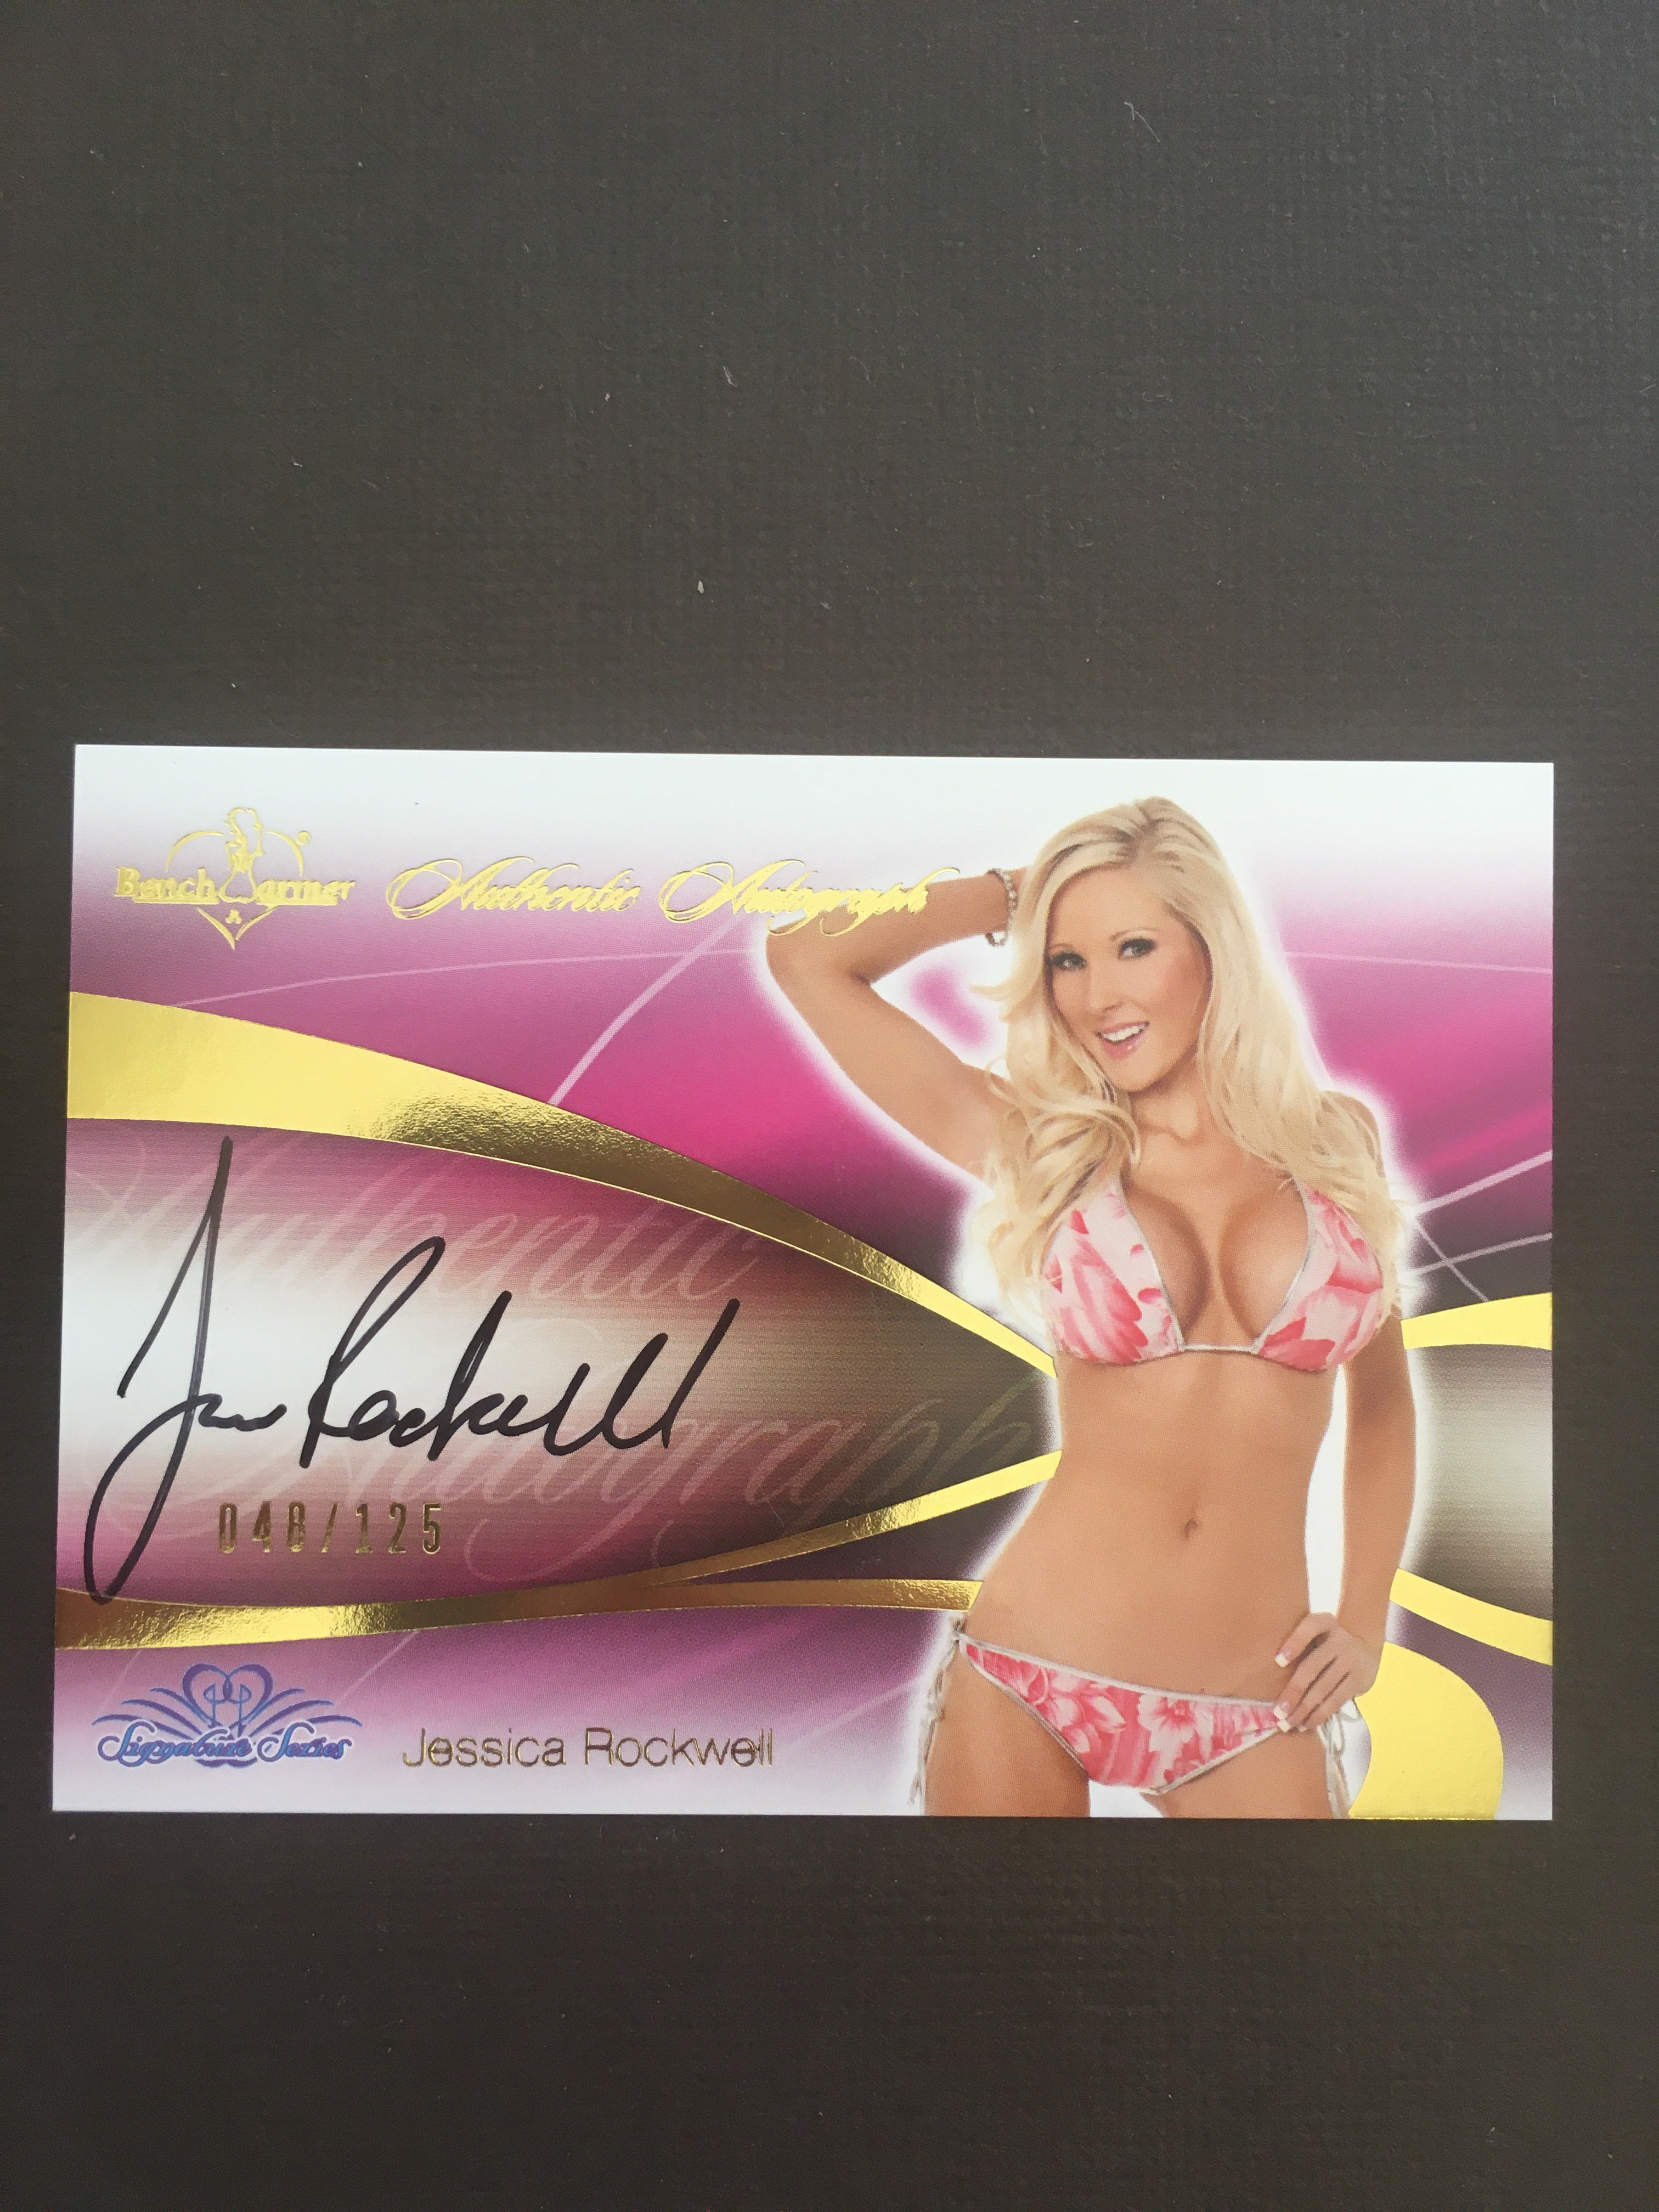 Jessica Rockwell - Autographed Benchwarmer Trading Card (1)